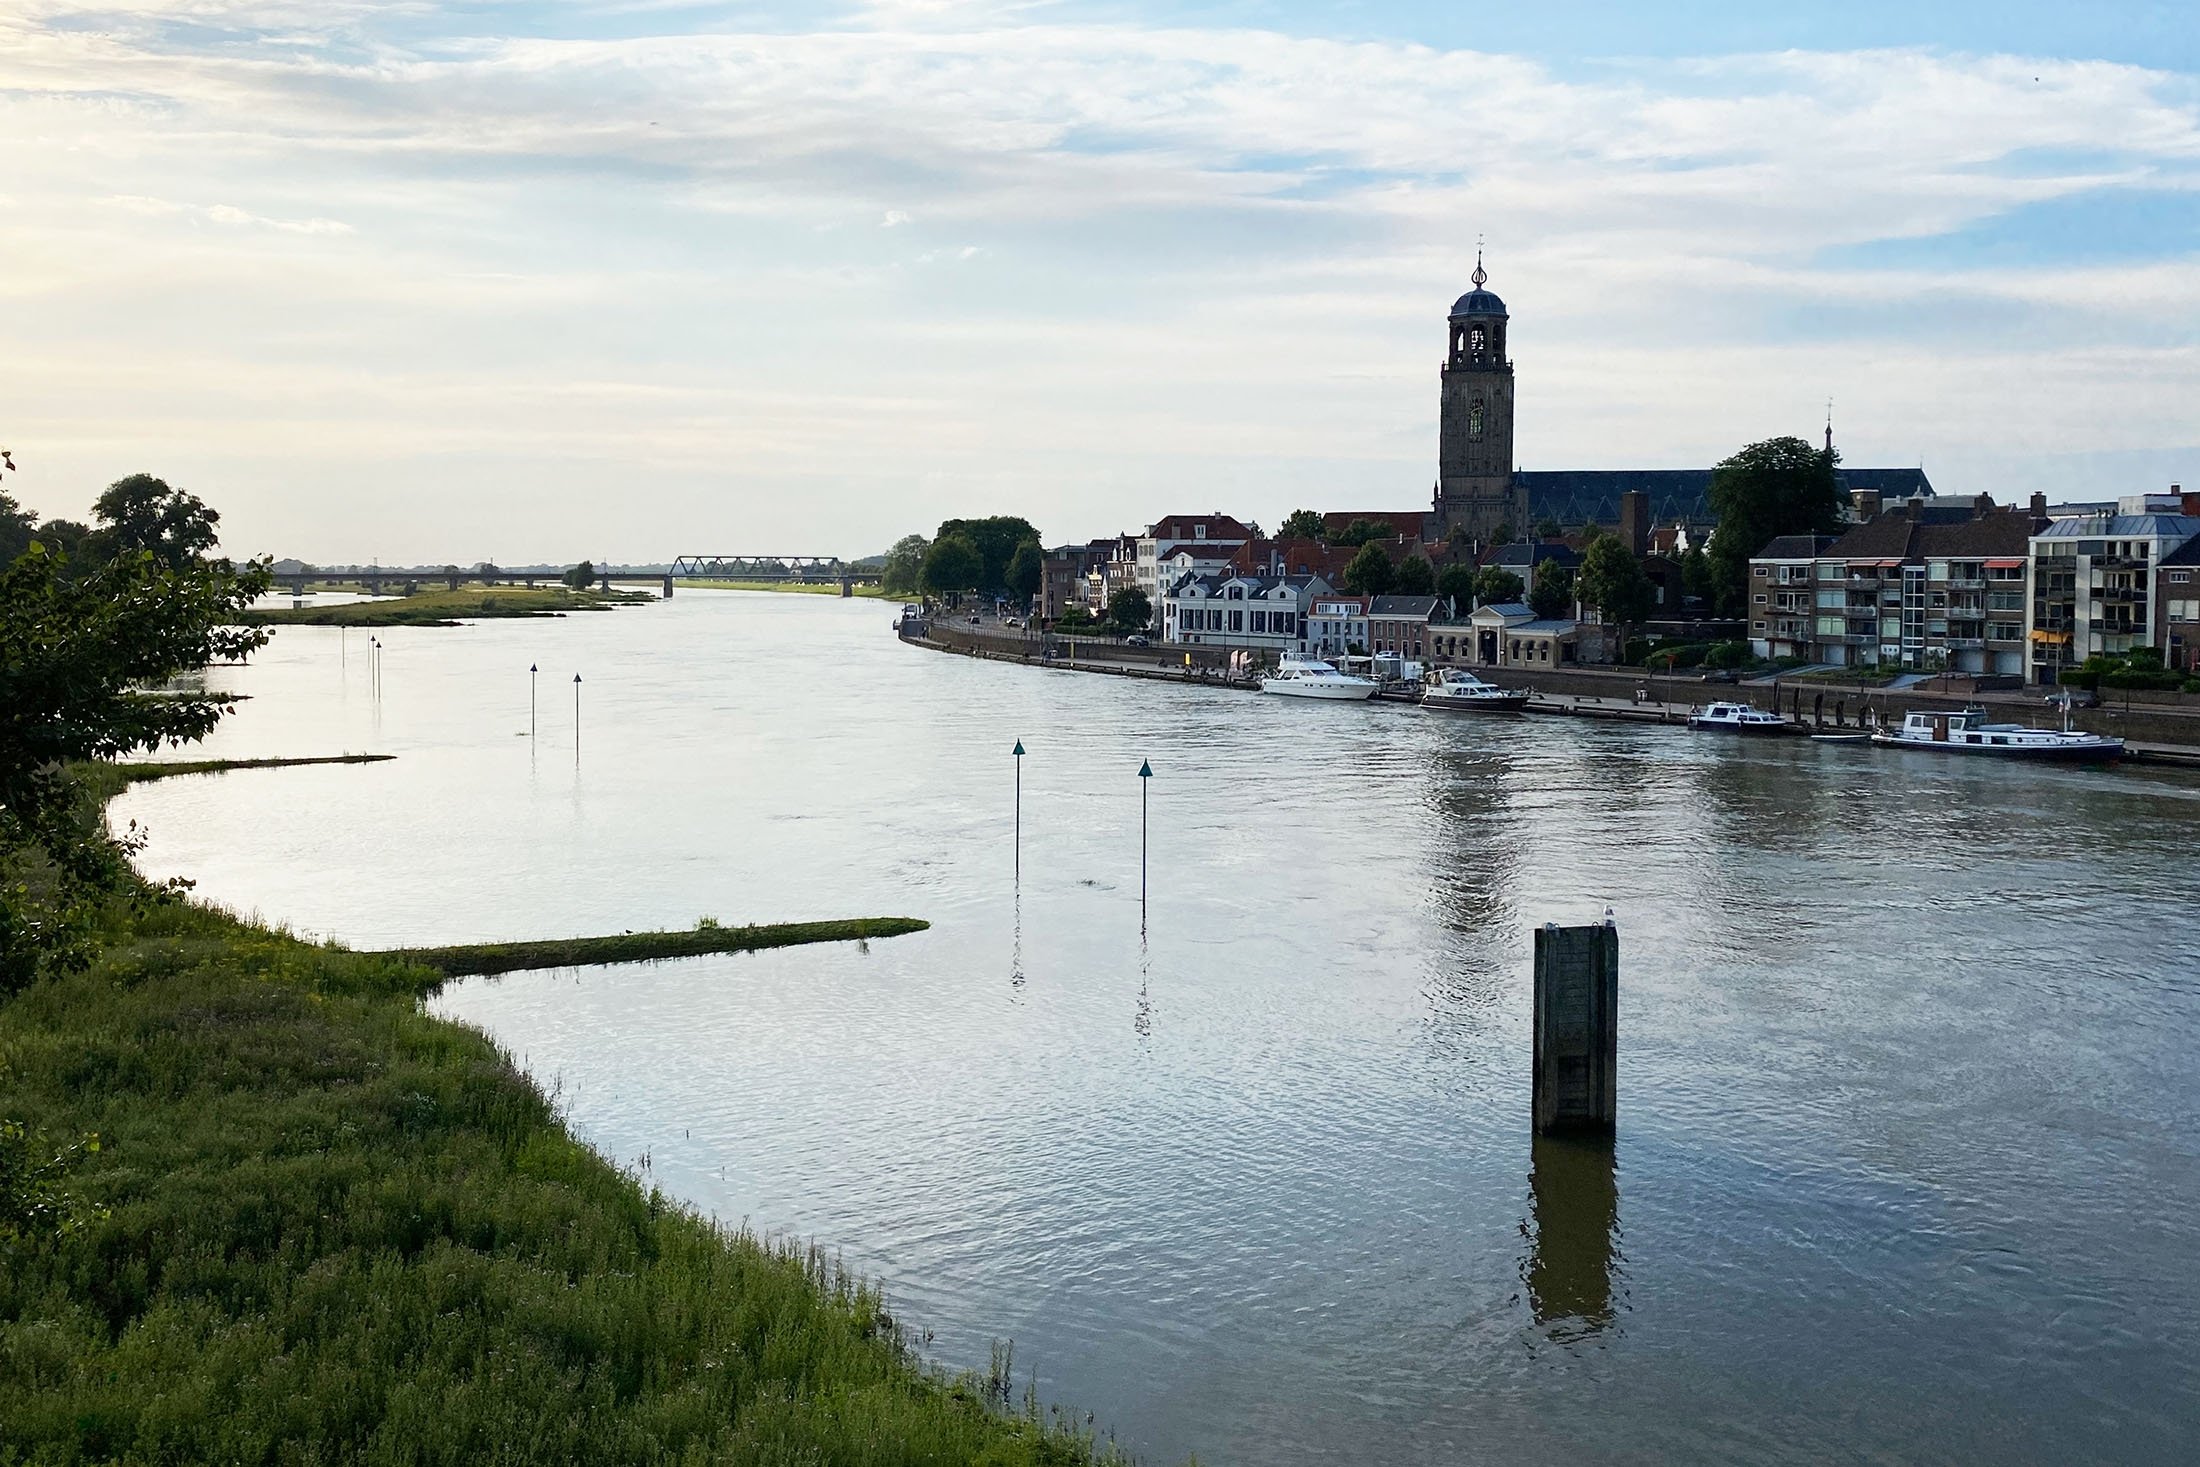 The panorama view over the tranquil Ijssel river towards Deventer is one reason this city in the eastern Netherlands is worth a visit, Deventer, the Netherlands. (dpa Photo)